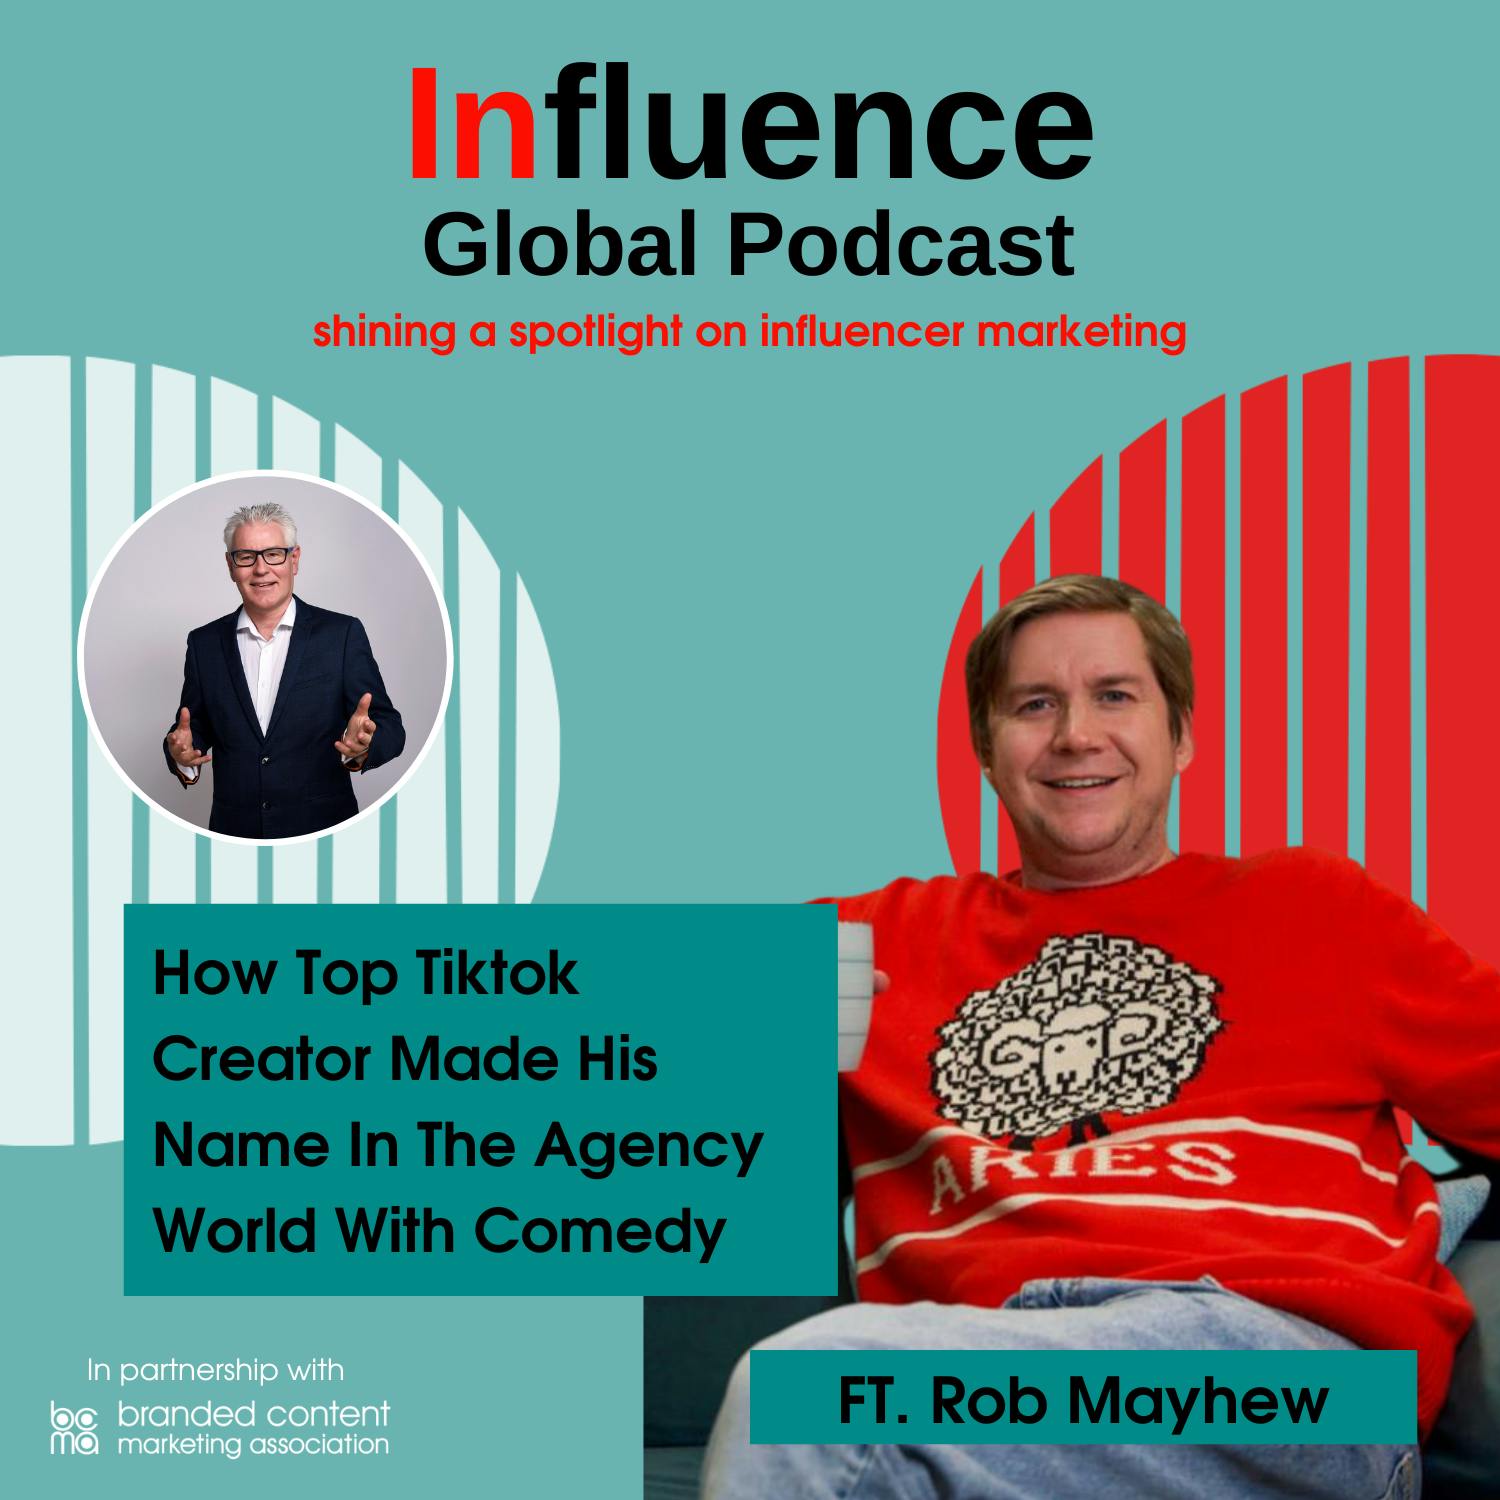 S7 Ep1: How Top Tiktok Creator Made His Name In The Agency World With Comedy Ft. Rob Mayhew